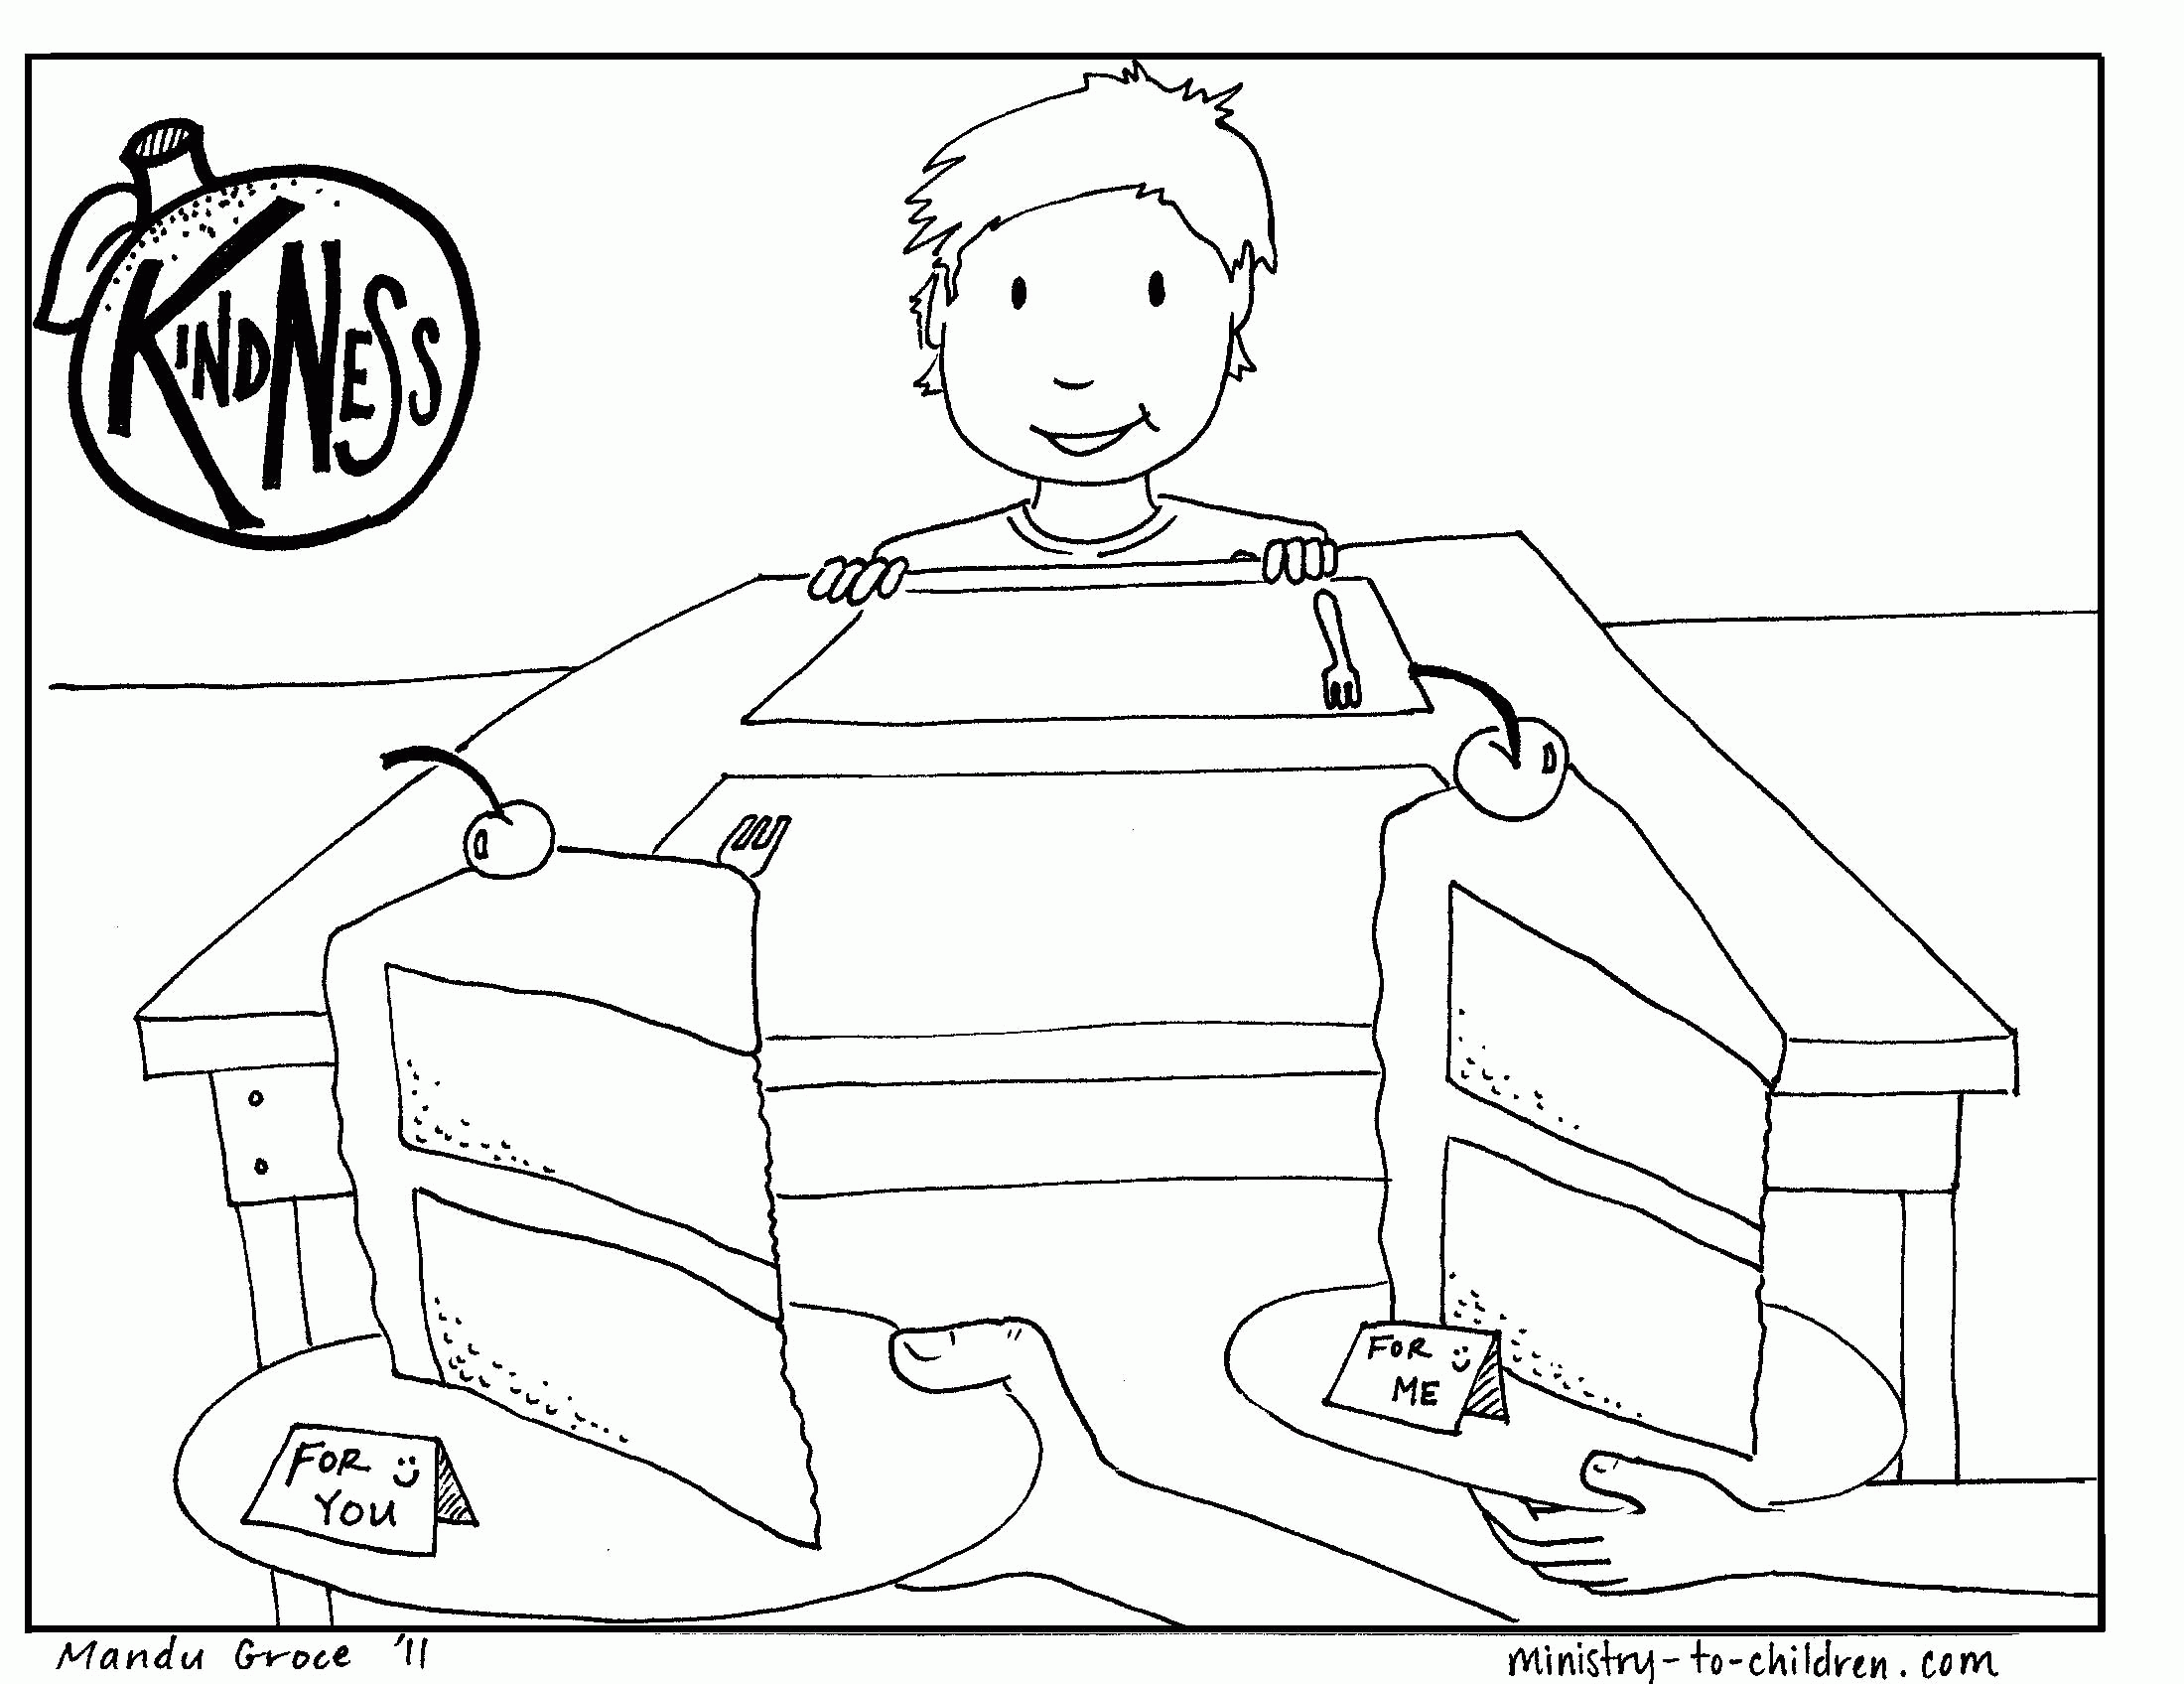 Kindness Coloring Pages | free printable for kids